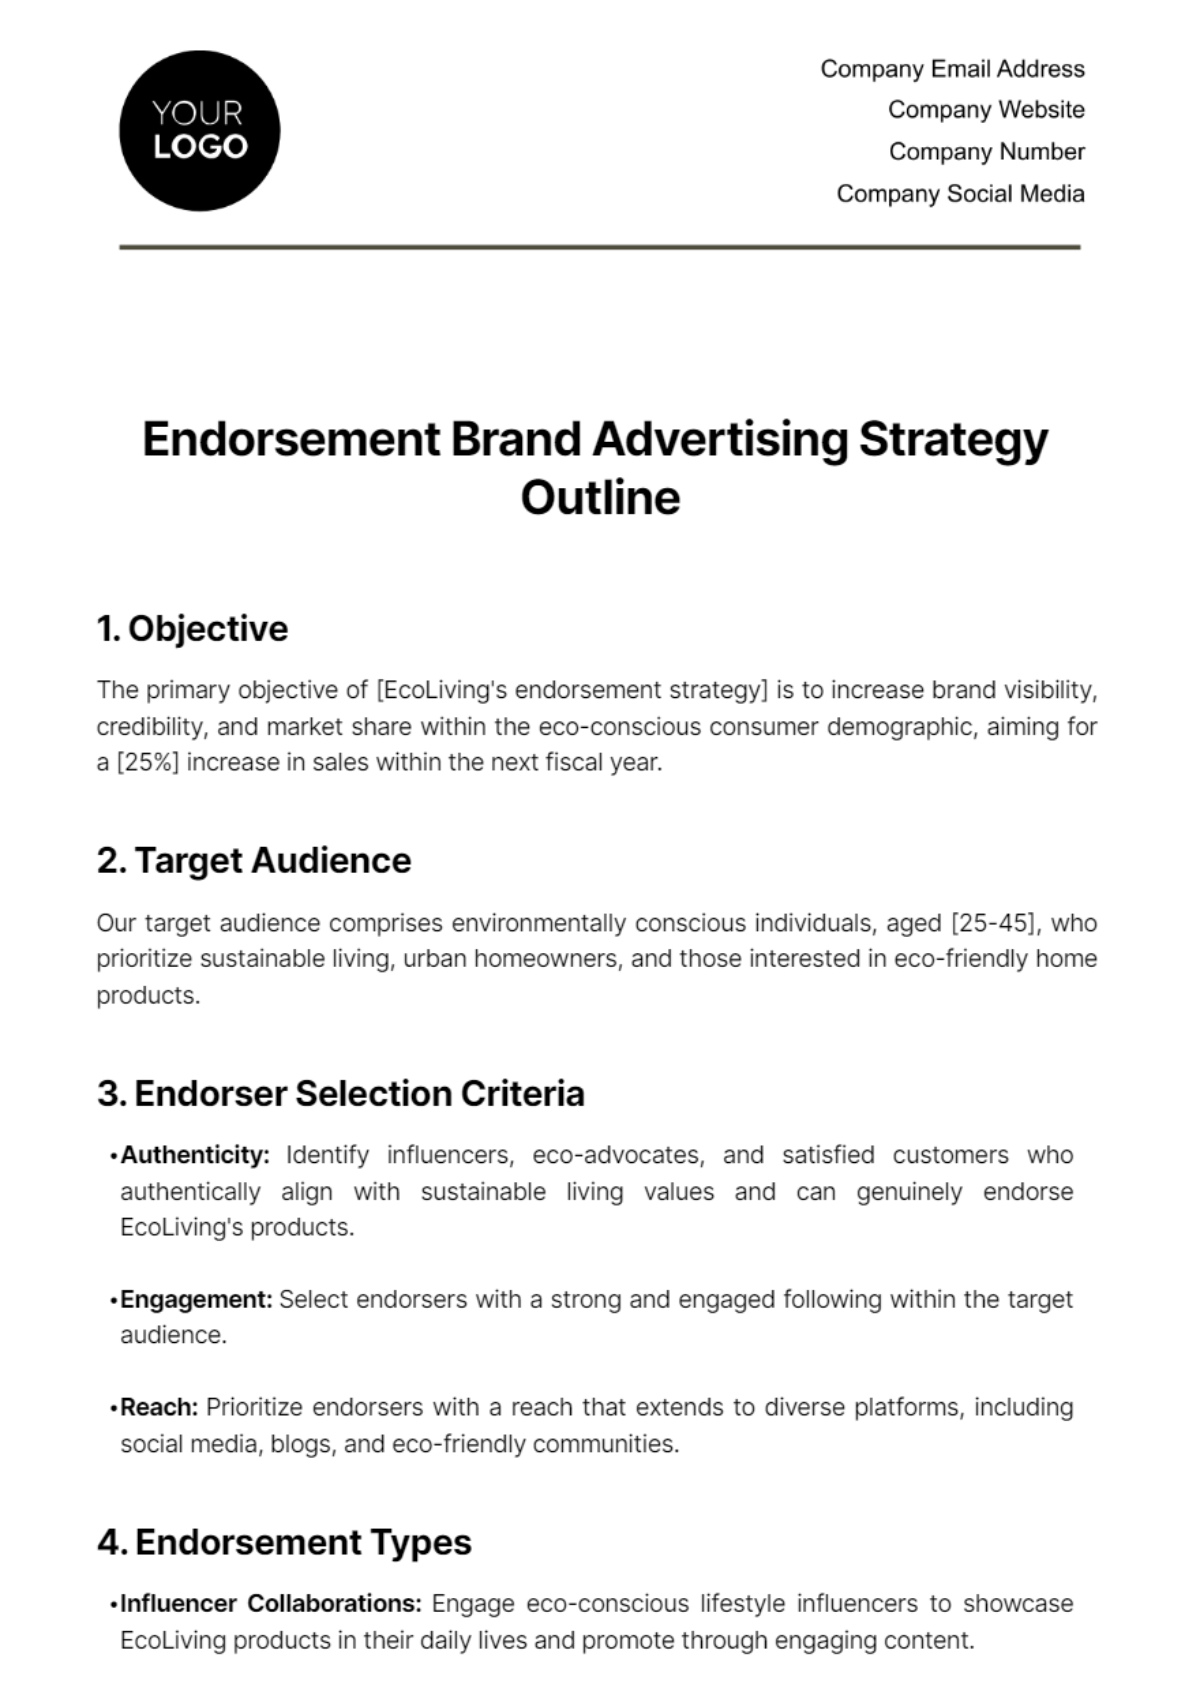 Endorsement Brand Advertising Strategy Outline Template